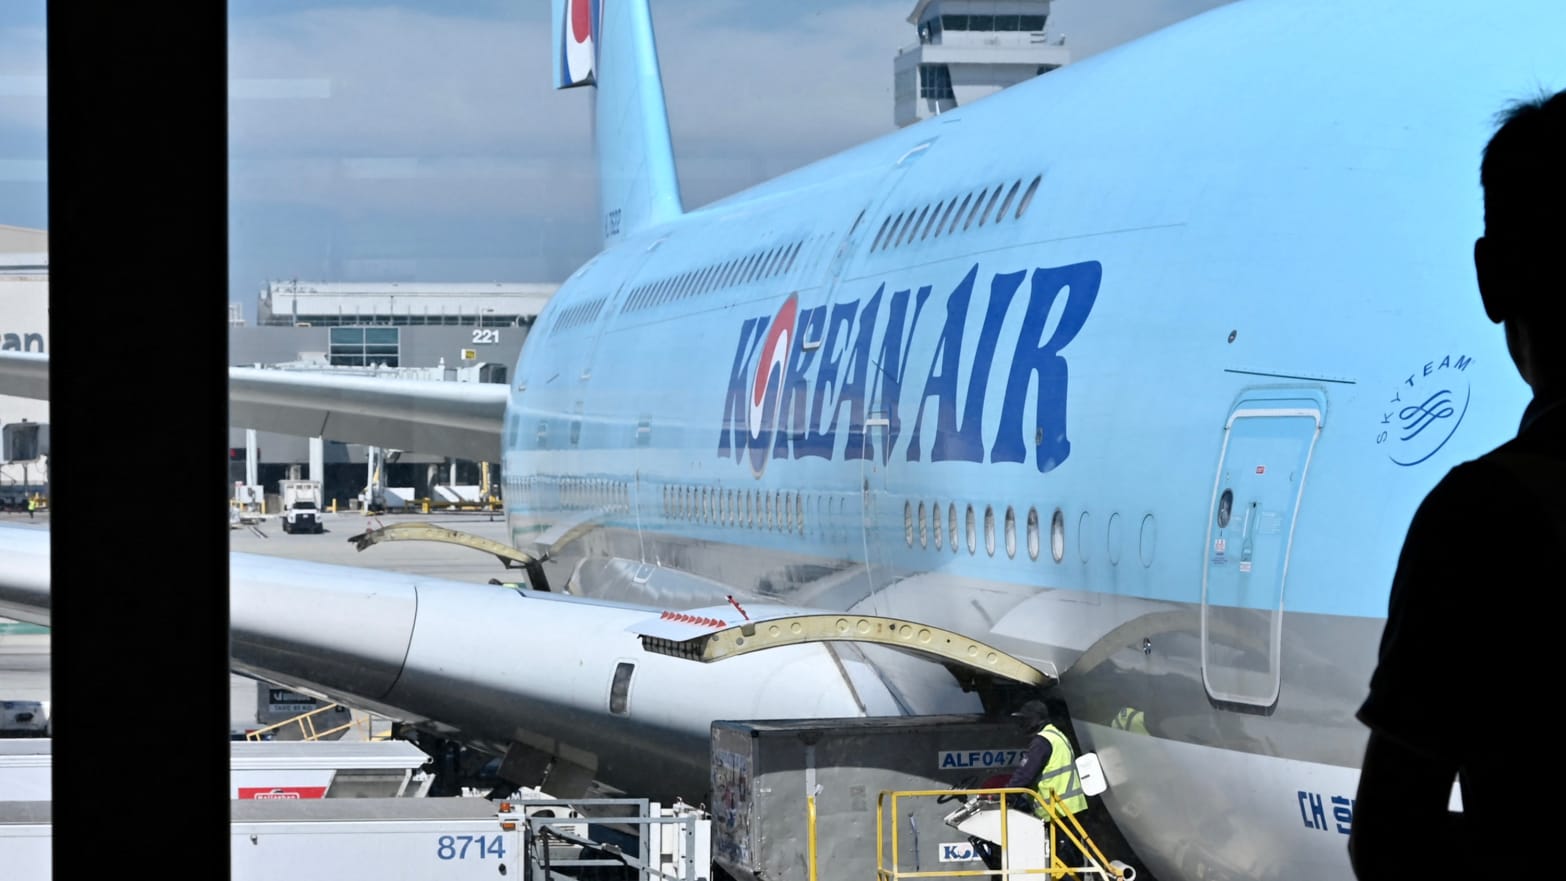 A photo of a Korean Air jetliner parked at the gate, as viewed from a window inside the terminal.